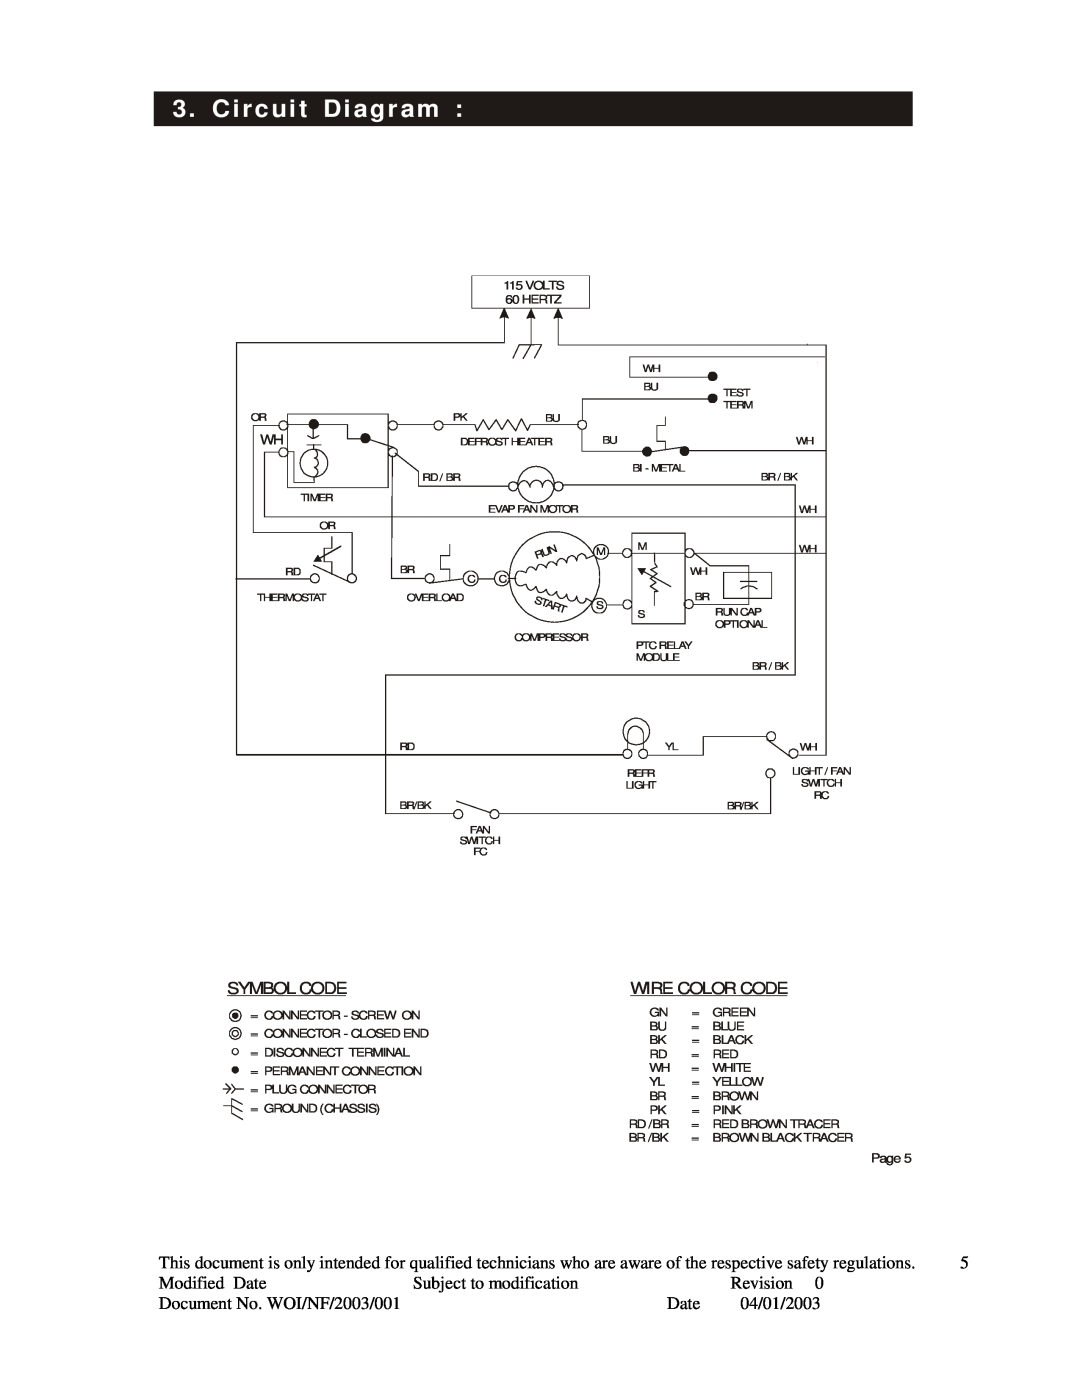 Whirlpool WRNE322 Circuit Diagram, Model ET09PCXHWO, Modified Date, Subject to modification, Revision, 04/01/2003 